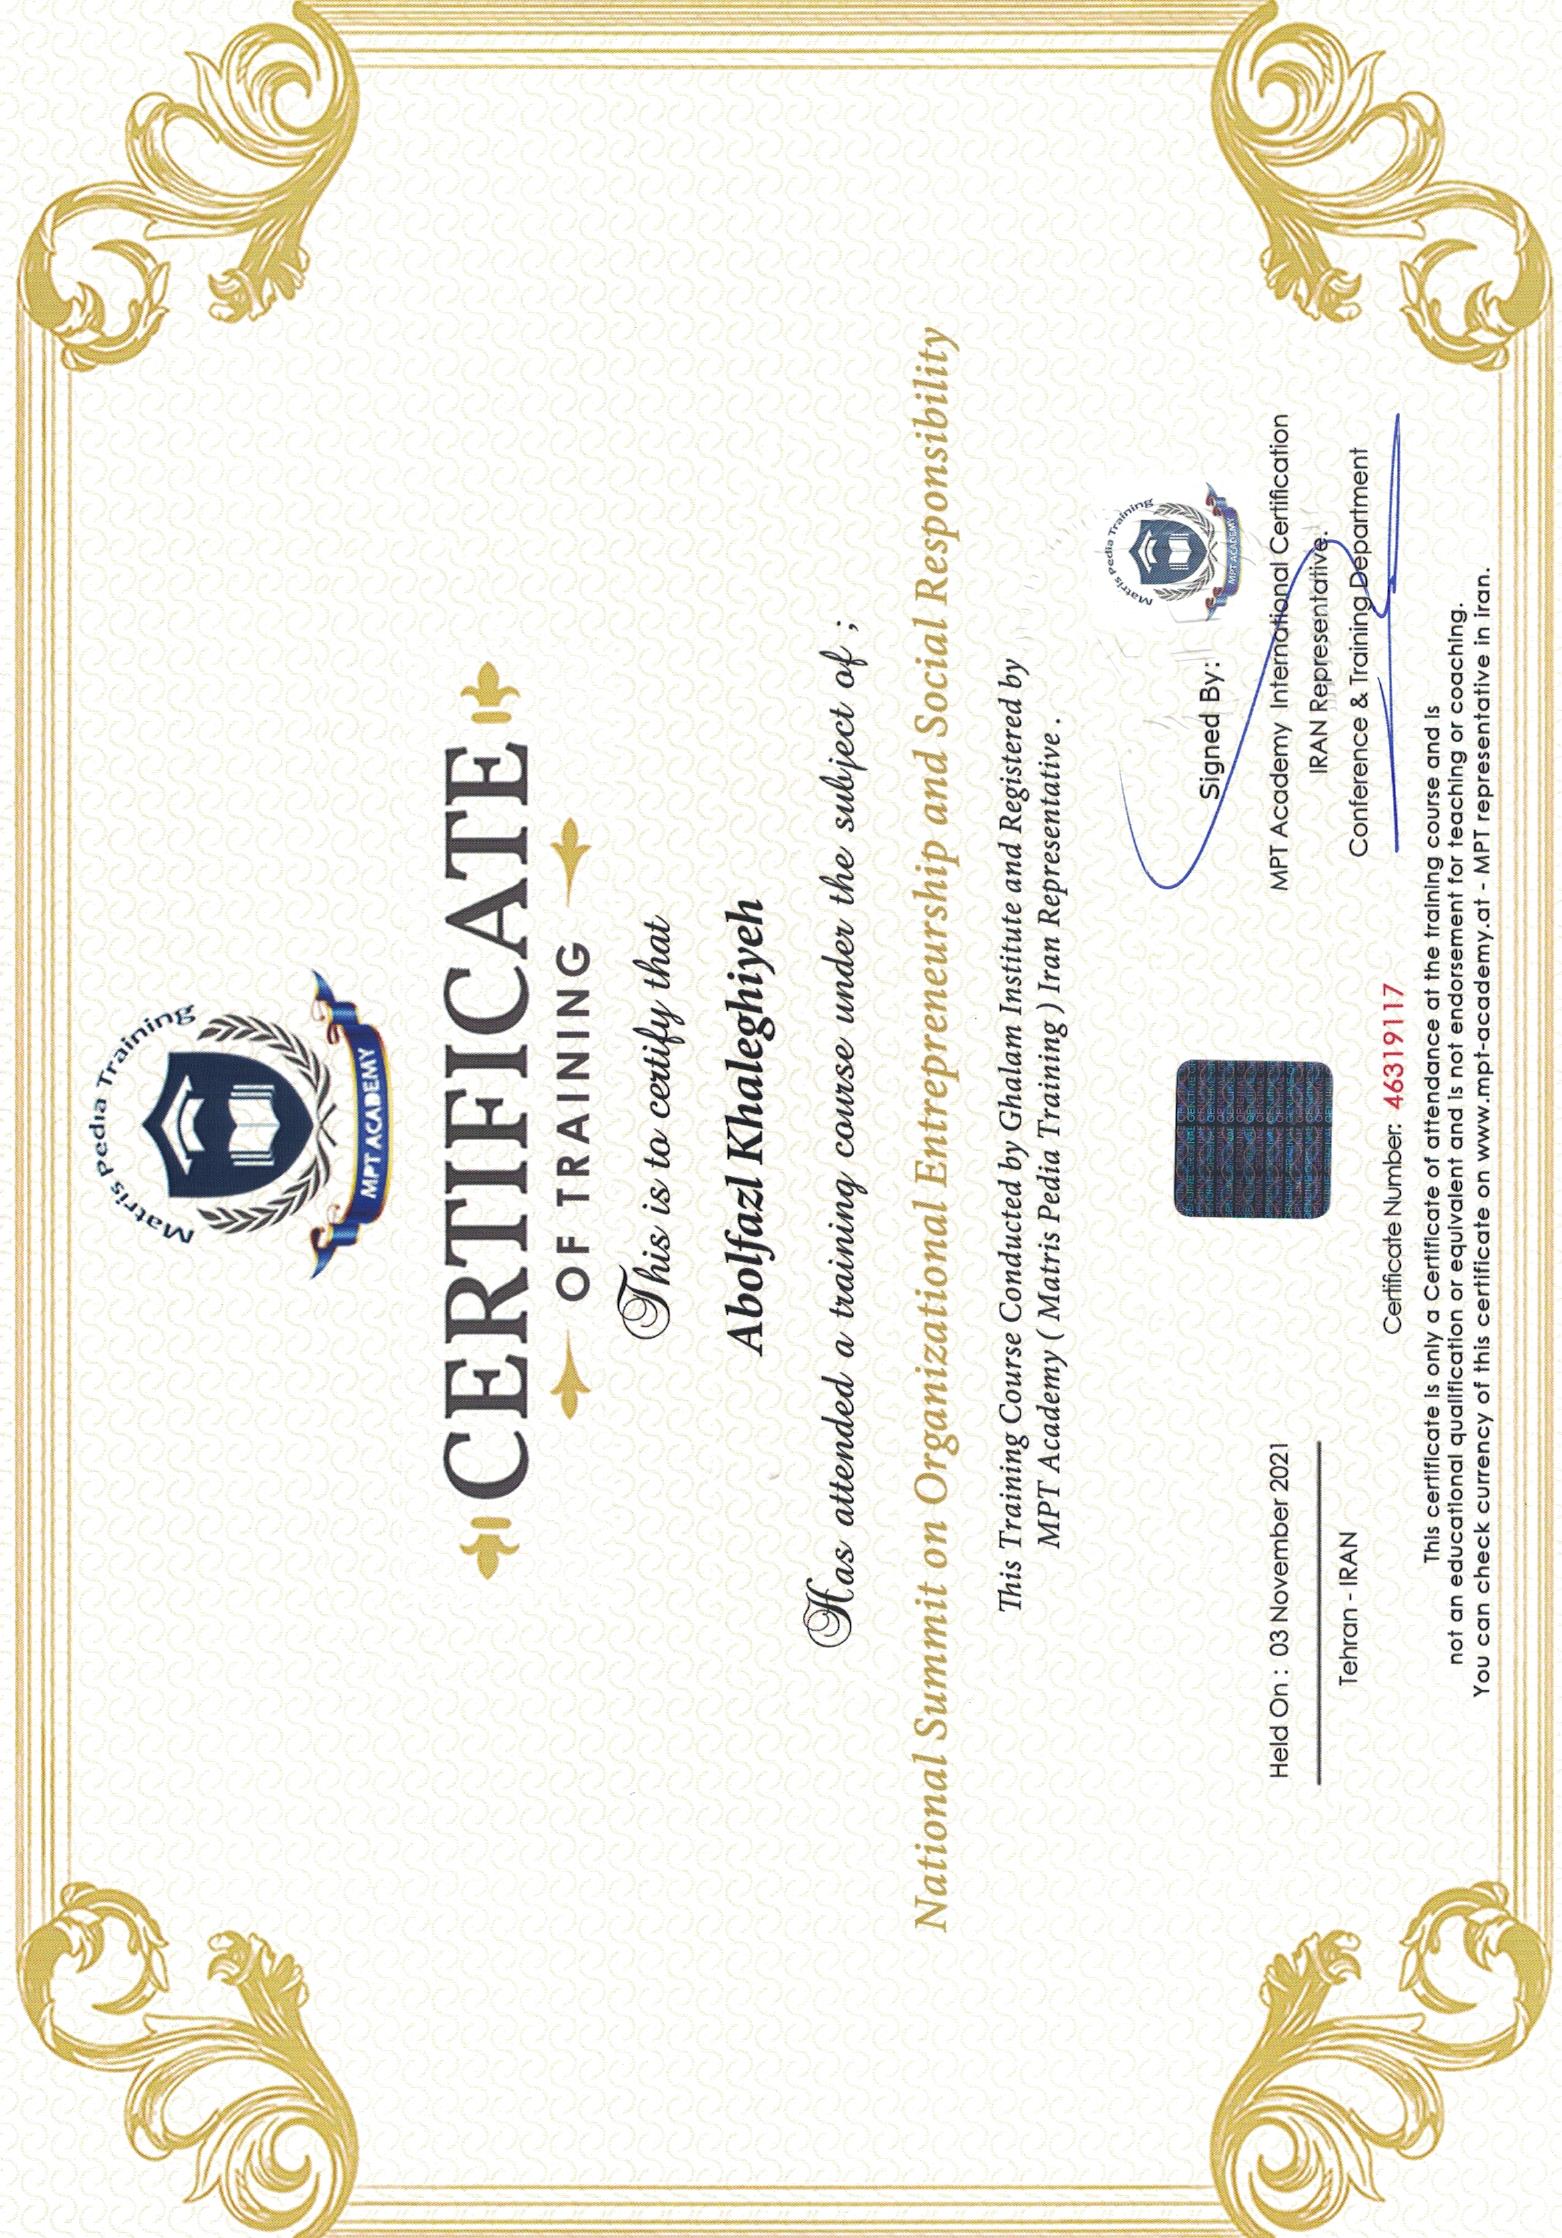 Amin Tile - certificate of traning